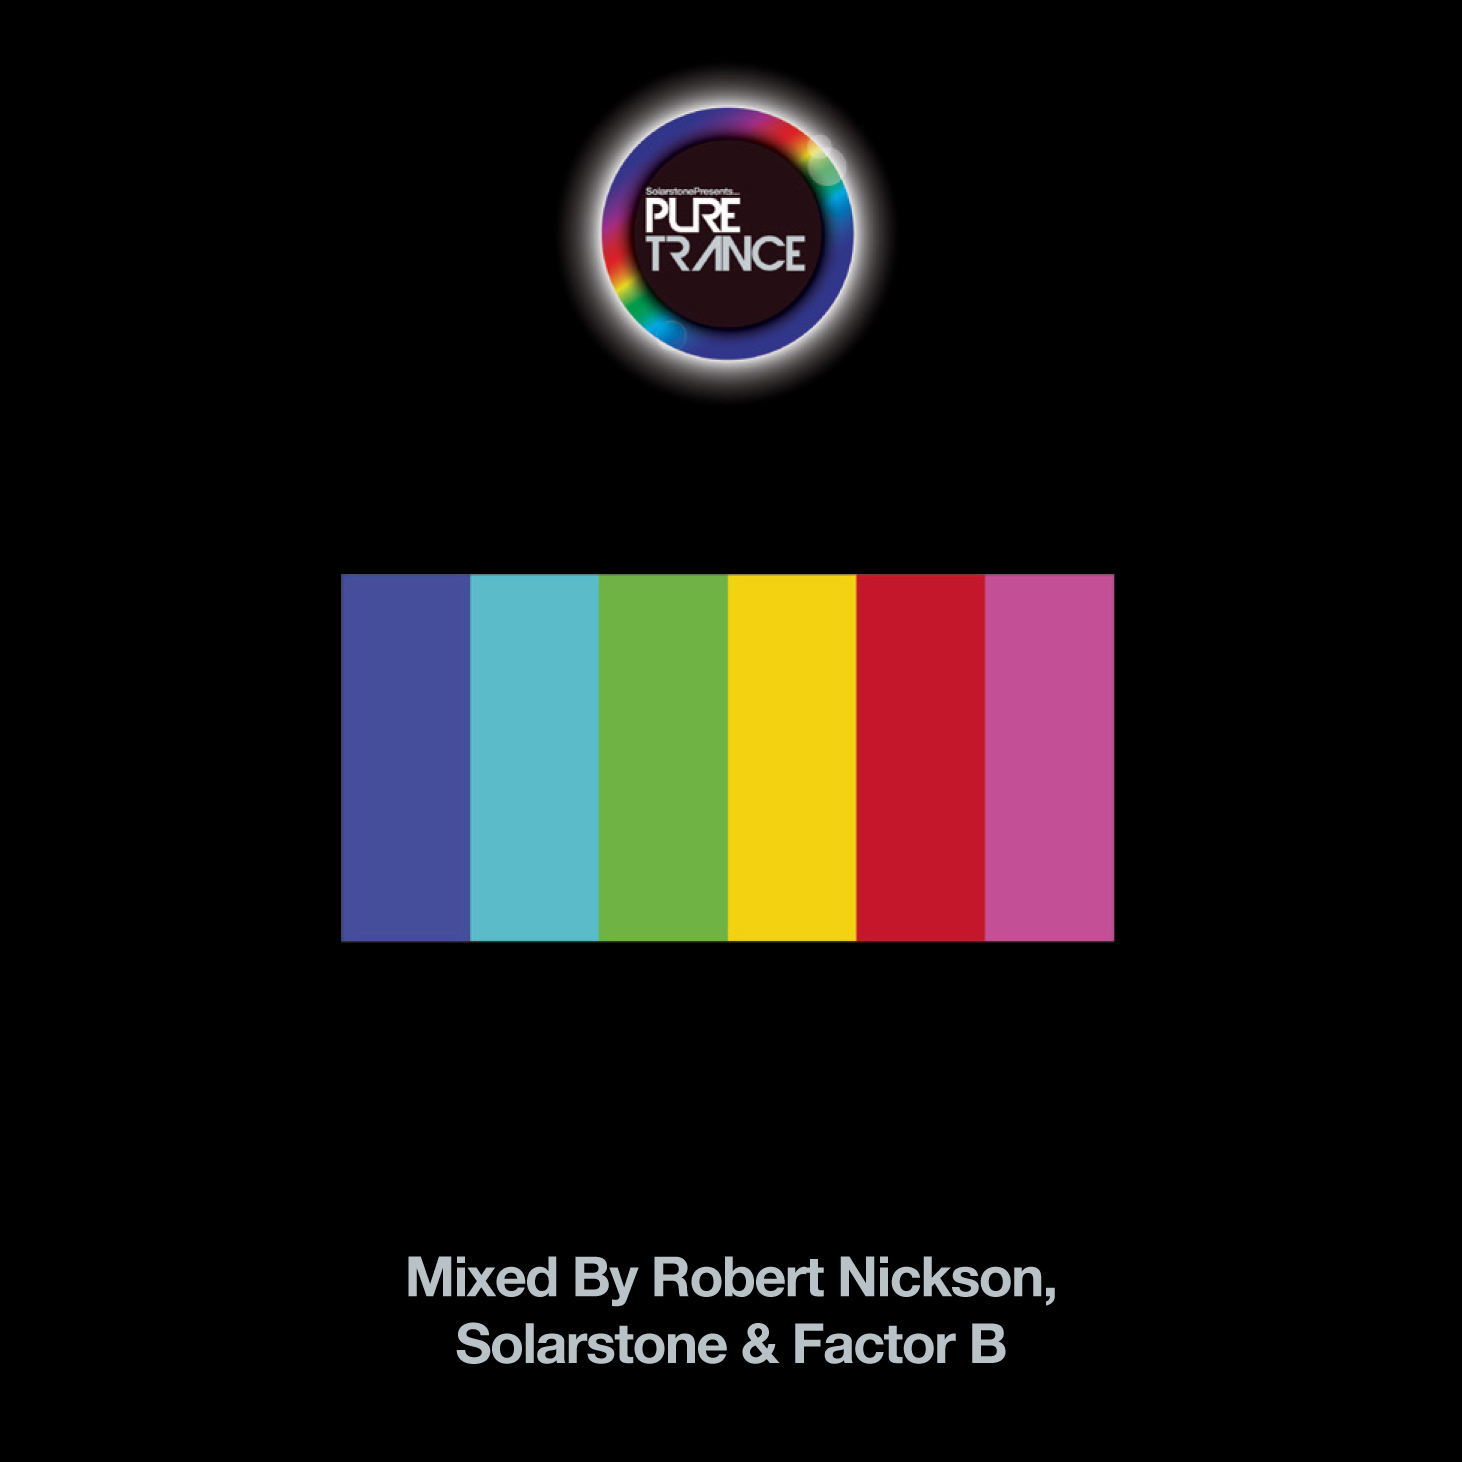 Solarstone presents Pure Trance 6 - Mixed By Robert Nickson, Solarstone & Factor B